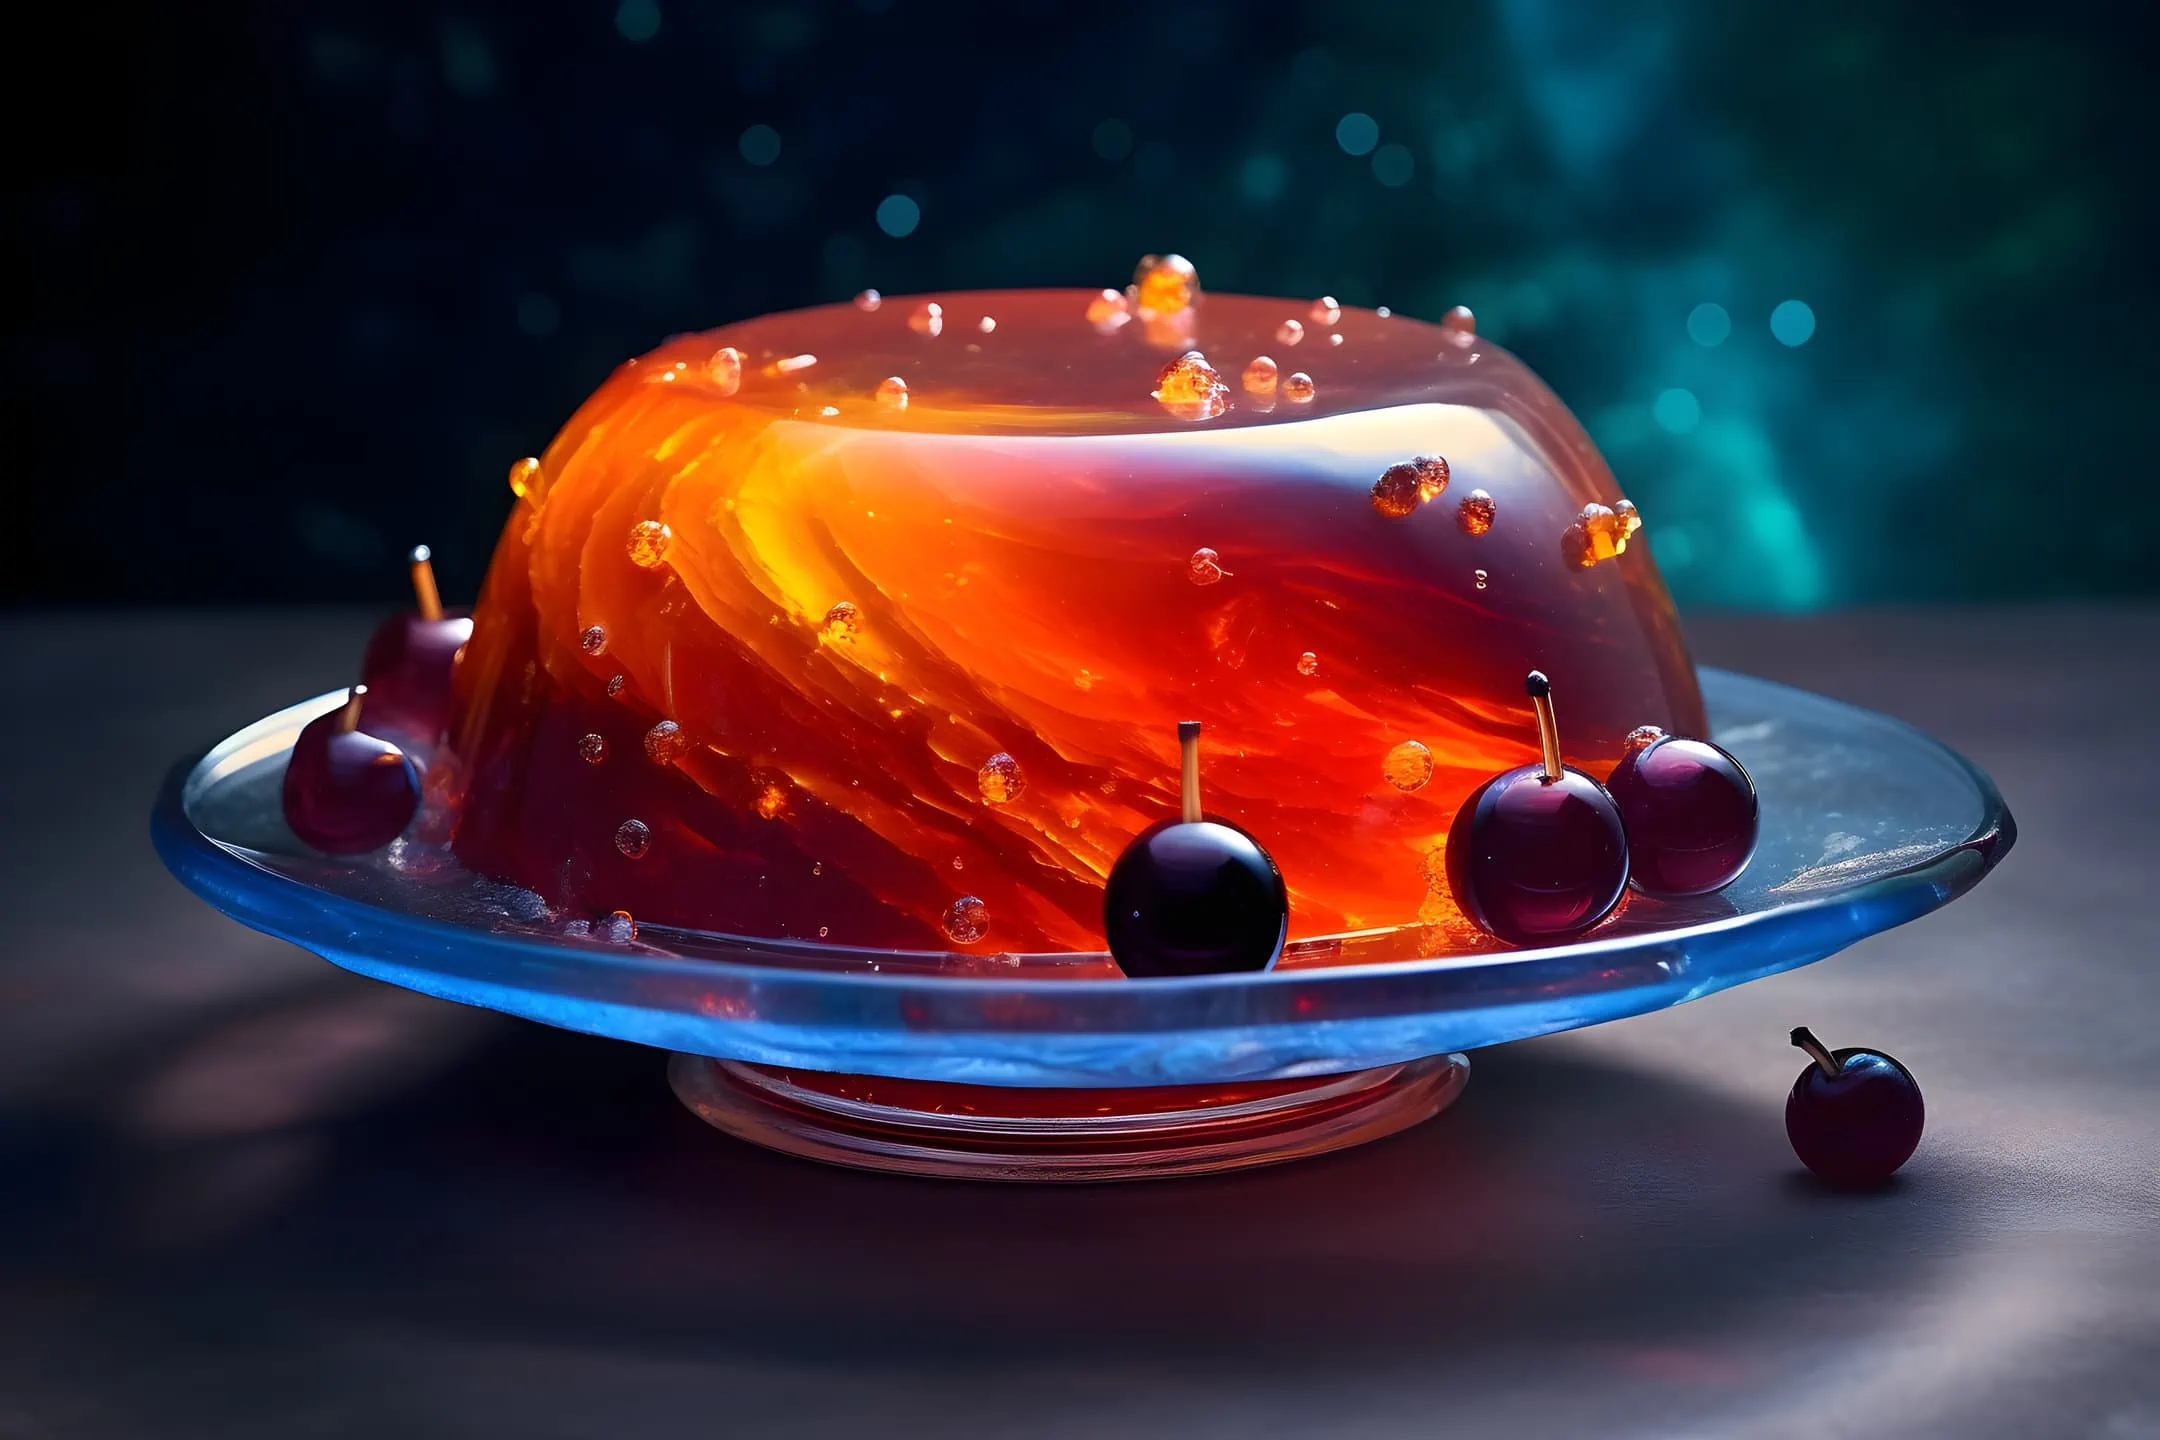 Our galaxy jelly cake recipe